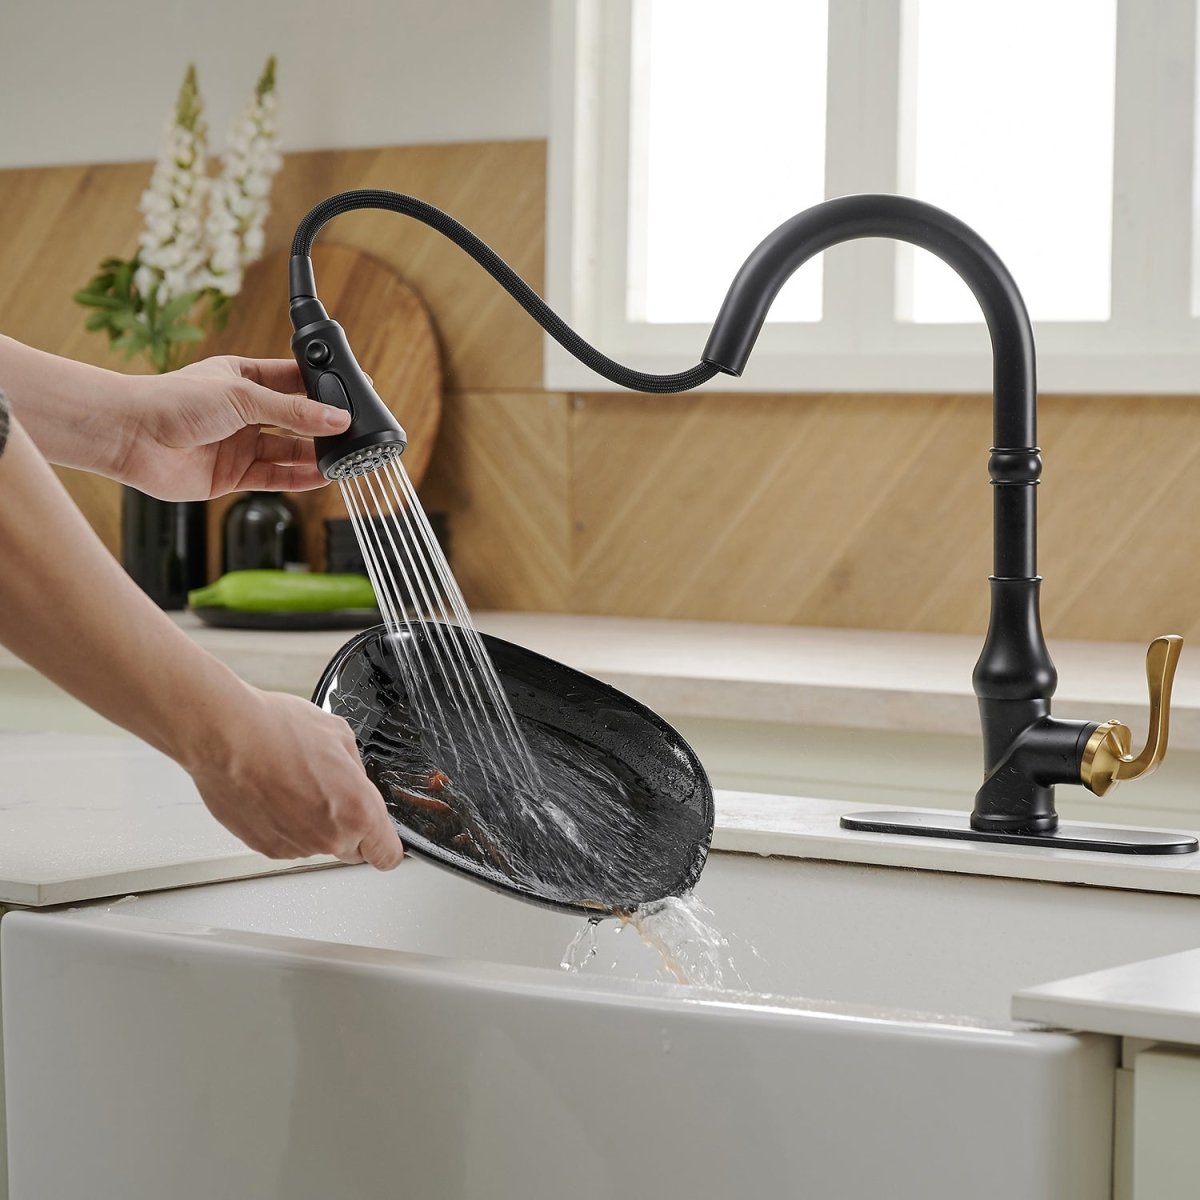 Single-Handle Faucet With Deck Plate in Matte Black & Gold - buyfaucet.com